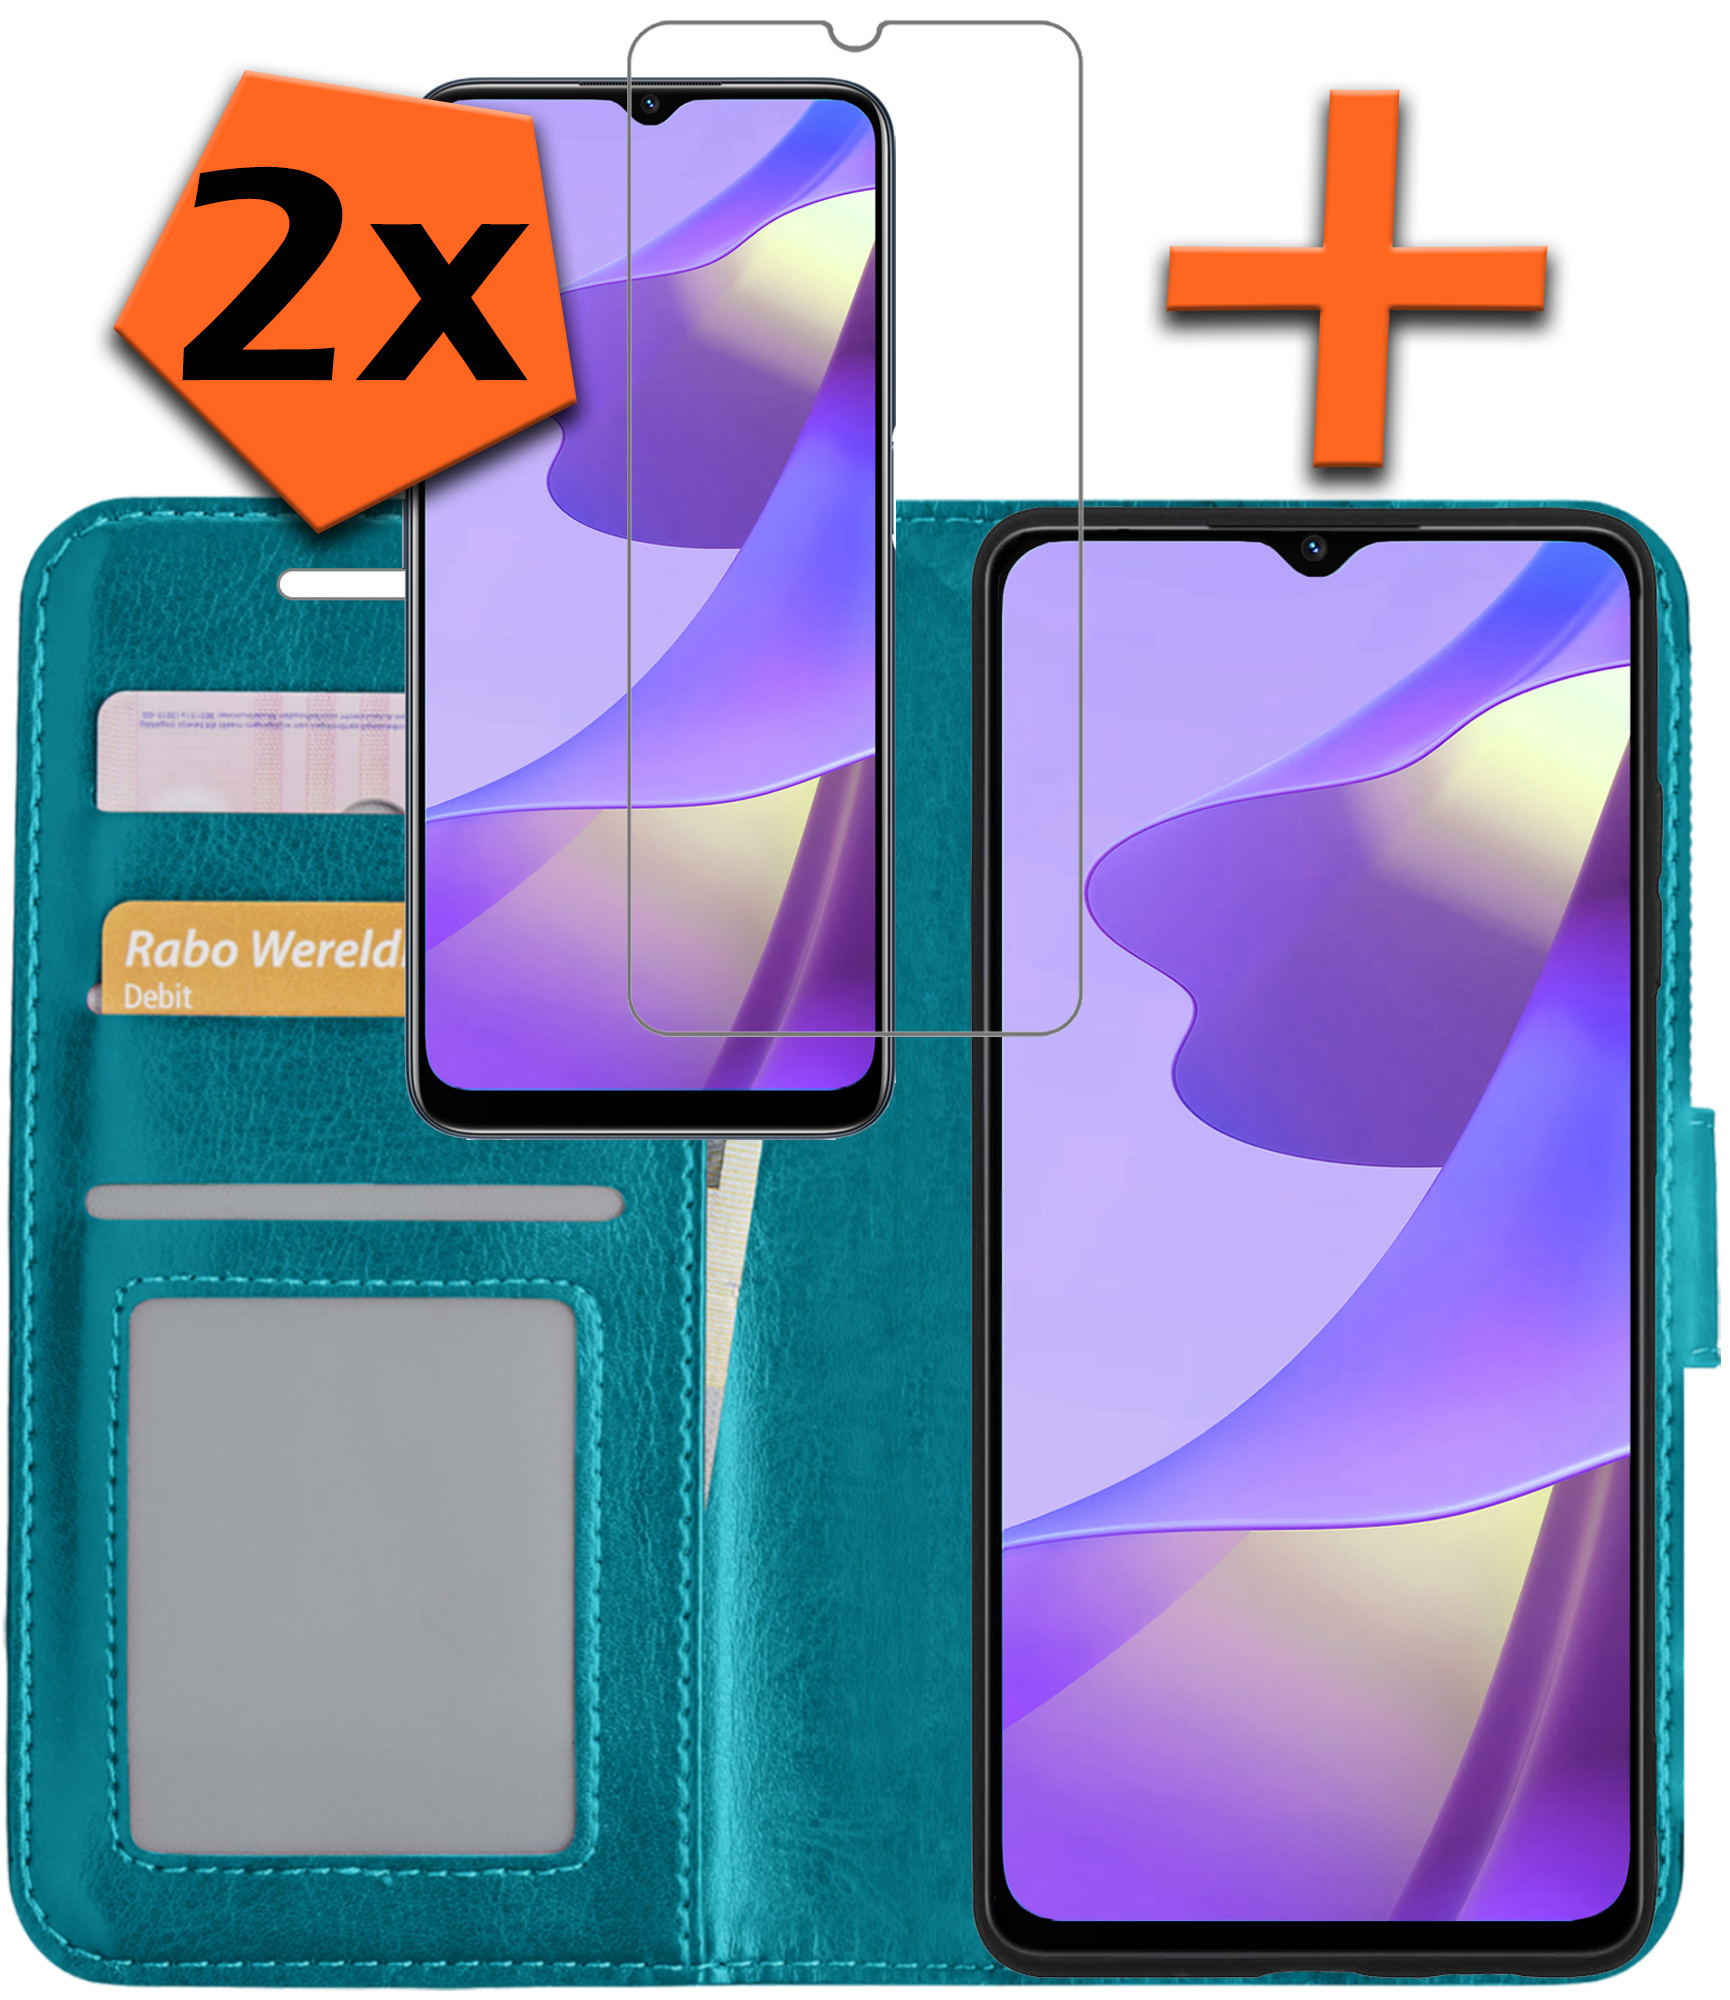 Nomfy OPPO A16s Hoesje Bookcase Met 2x Screenprotector - OPPO A16s Screenprotector 2x - OPPO A16s Book Case Met 2x Screenprotector Turquoise